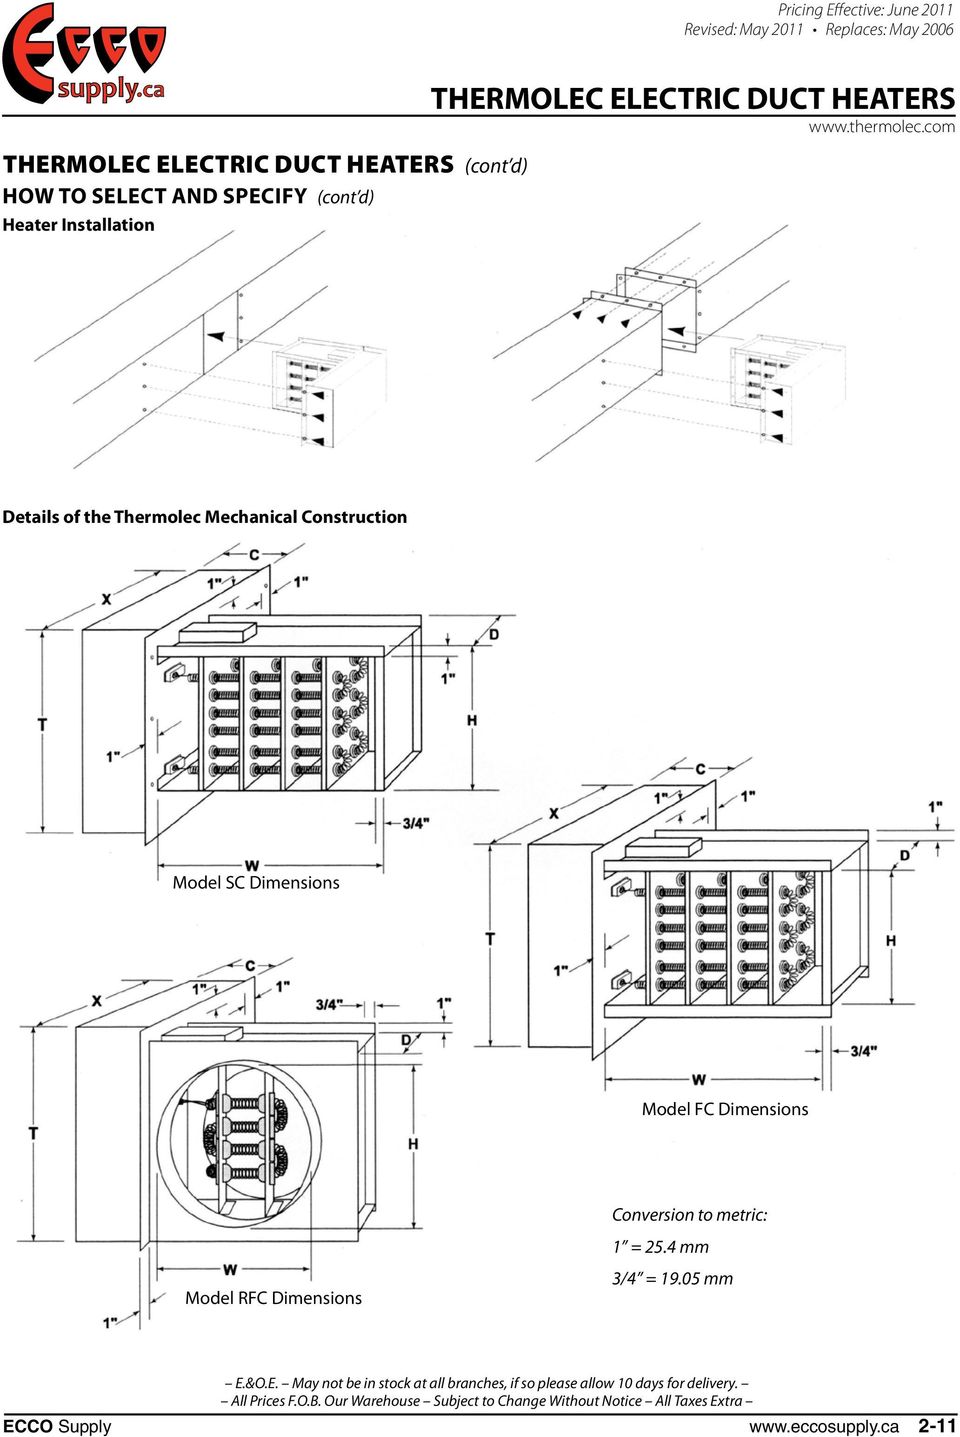 THERMOLEC ELECTRIC DUCT HEATERS - PDF Free Download  Thermolec Duct Heater Wiring Diagram    DocPlayer.net